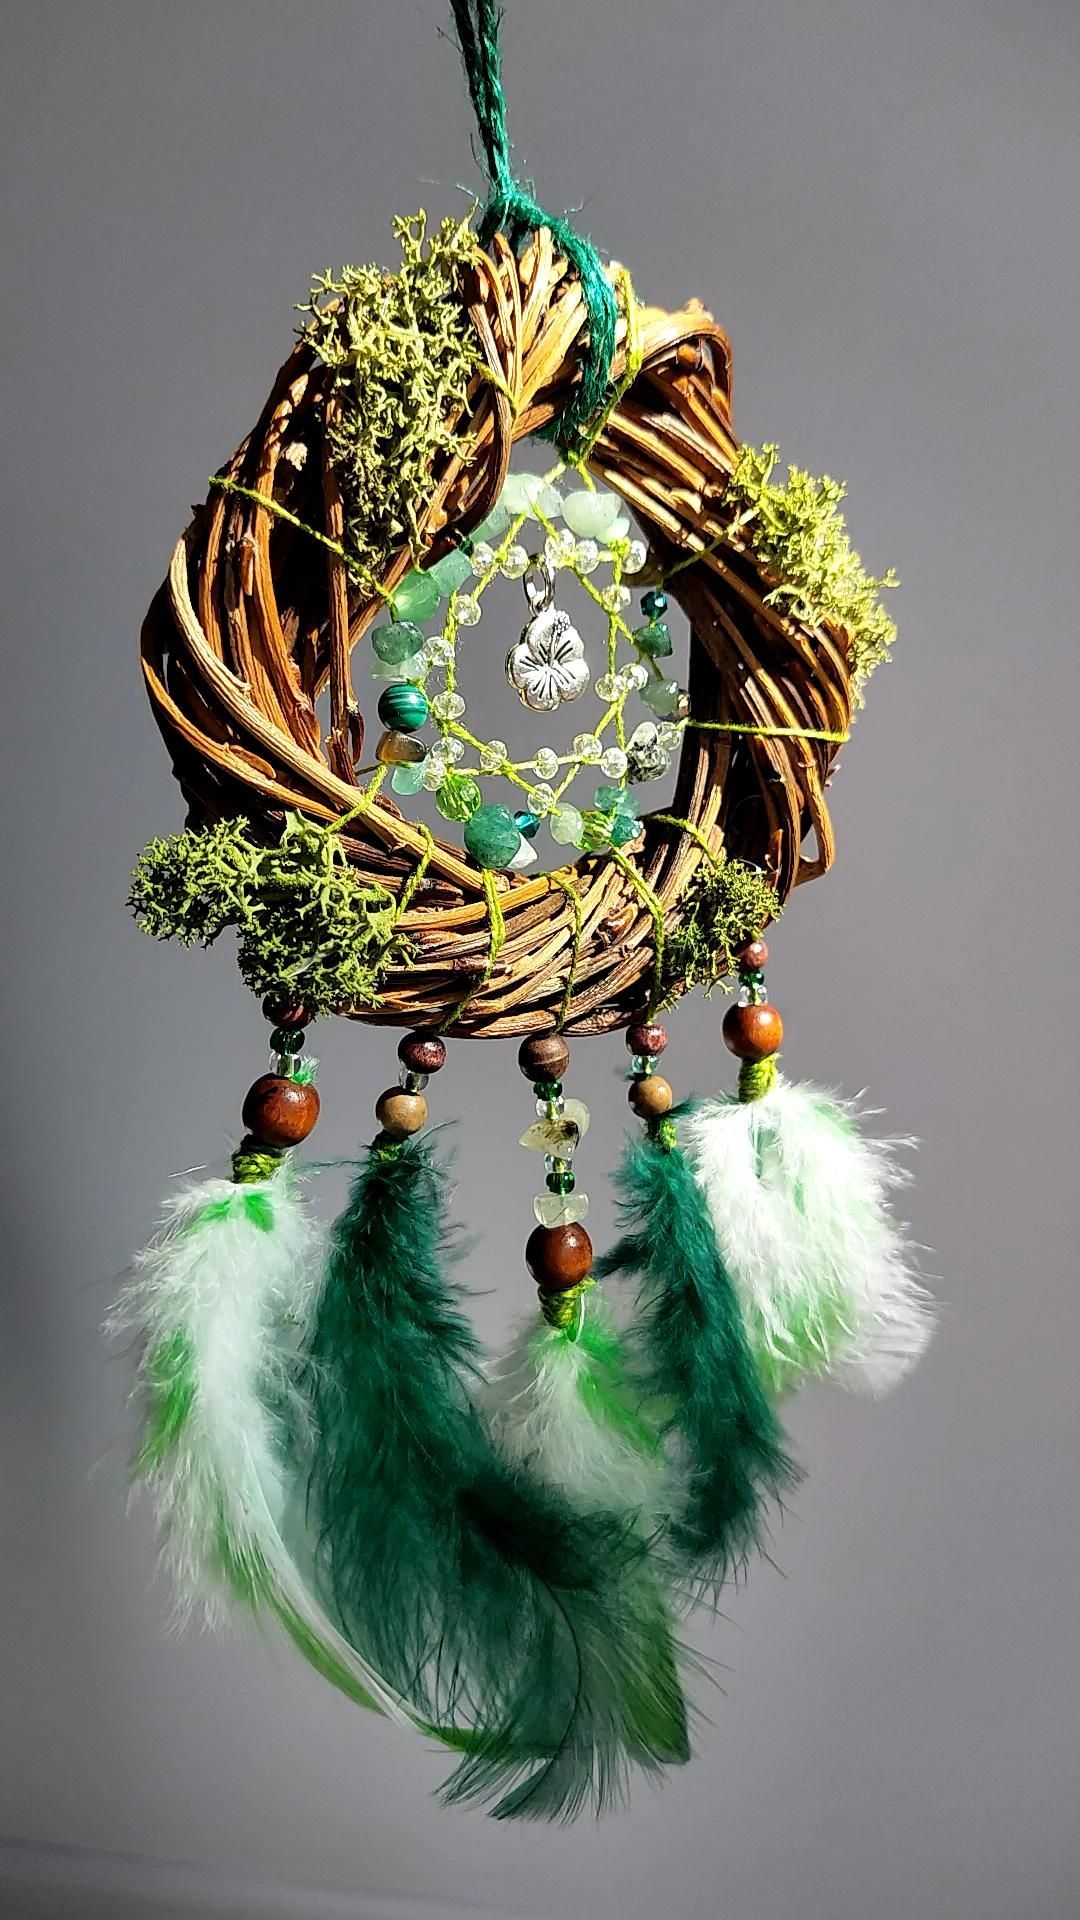 Natural Green Dreamcatcher, Inspired by Native American Dreamcatchers, Small Moss Dreamcatcher,Fores - Natural Green Dreamcatcher, Inspired by Native American Dreamcatchers, Small Moss Dreamcatcher,Fores -   18 diy Dream Catcher nature ideas